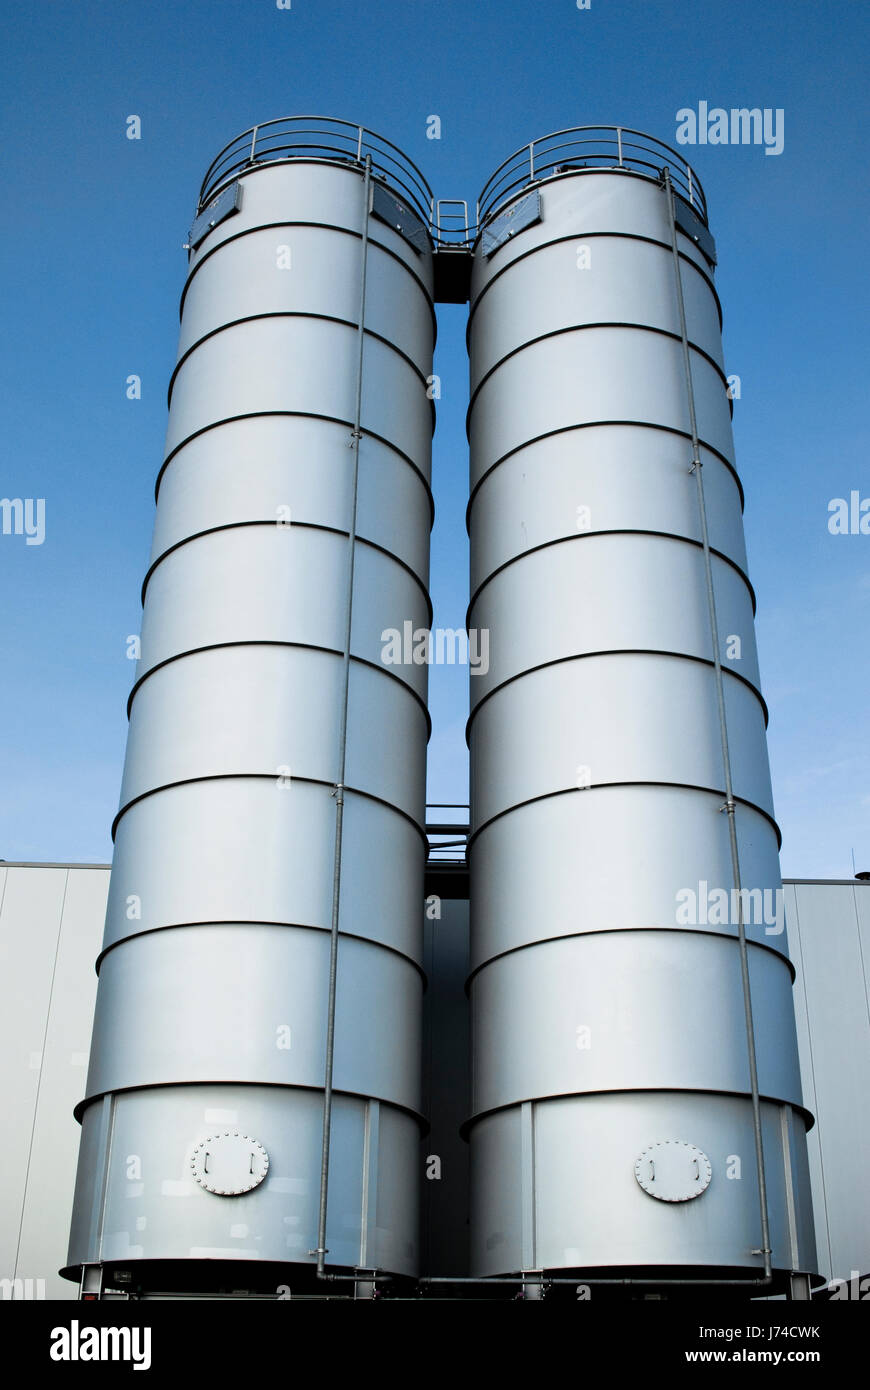 Industrie Metall-Container Chemie Silo Bestimmung Lager Lager Puffer Lager  worms Stockfotografie - Alamy